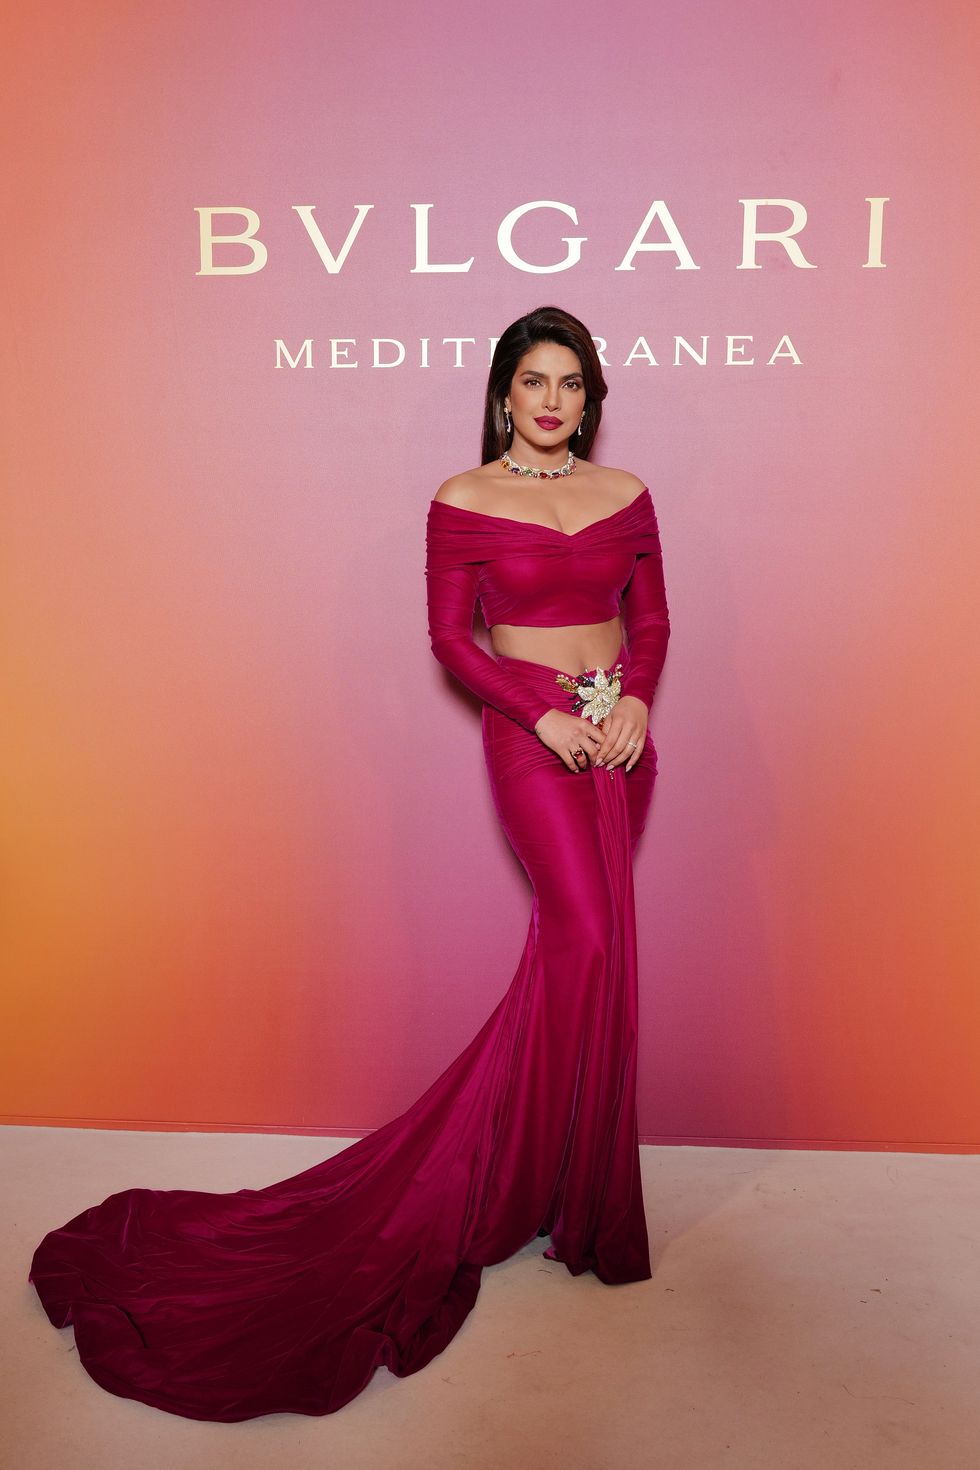 venice, italy may 16 priyanka chopra jonas attends the bulgari mediterranea high jewelry event at palazzo ducale on may 16, 2023 in venice photo by claudio laveniagetty images for bulgari